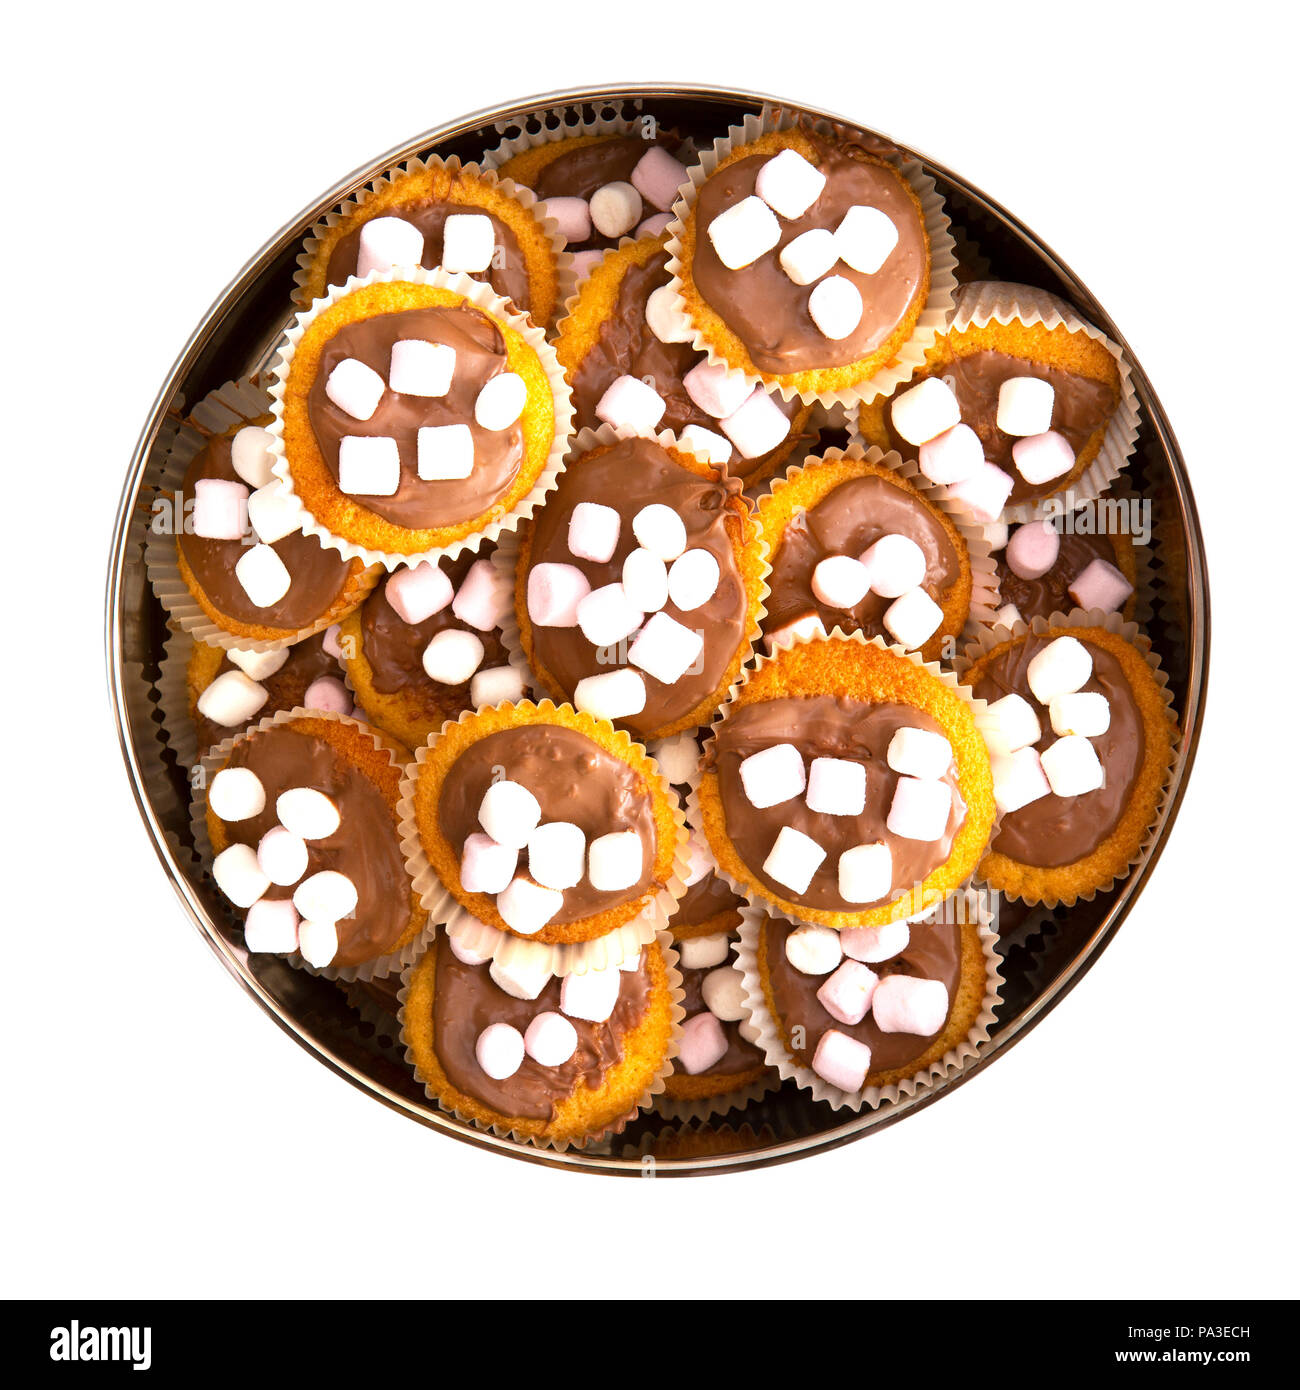 Cake tin full of homemade cup cakes with chocolate and marshmallows on a white background Stock Photo